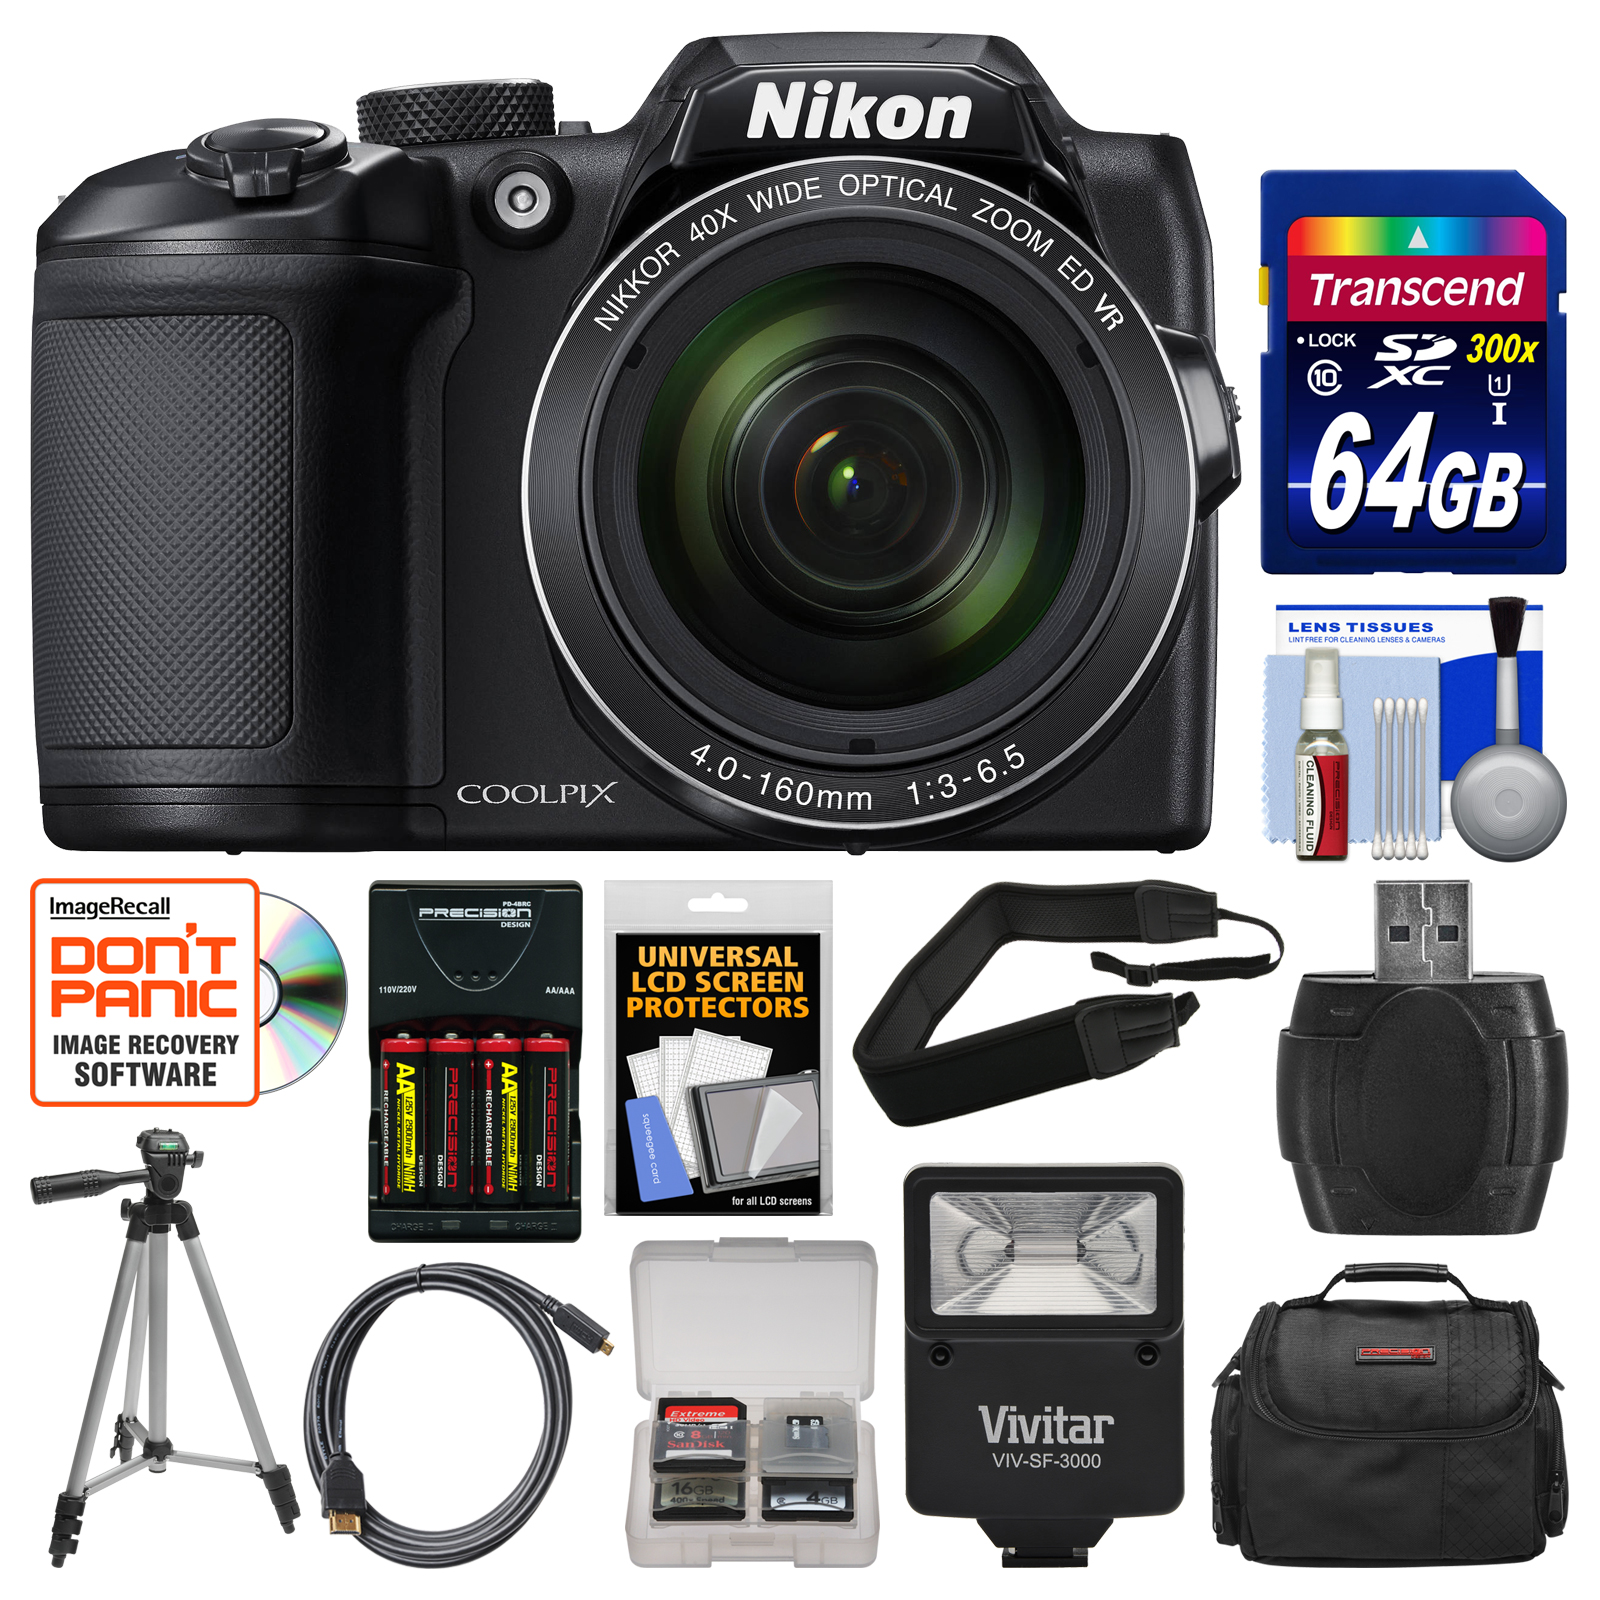 Nikon Coolpix B500 Wi-Fi Digital Camera (Black) with 64GB Card + Case + Flash + Batteries and Charger + Tripod + Strap + Kit - image 1 of 6